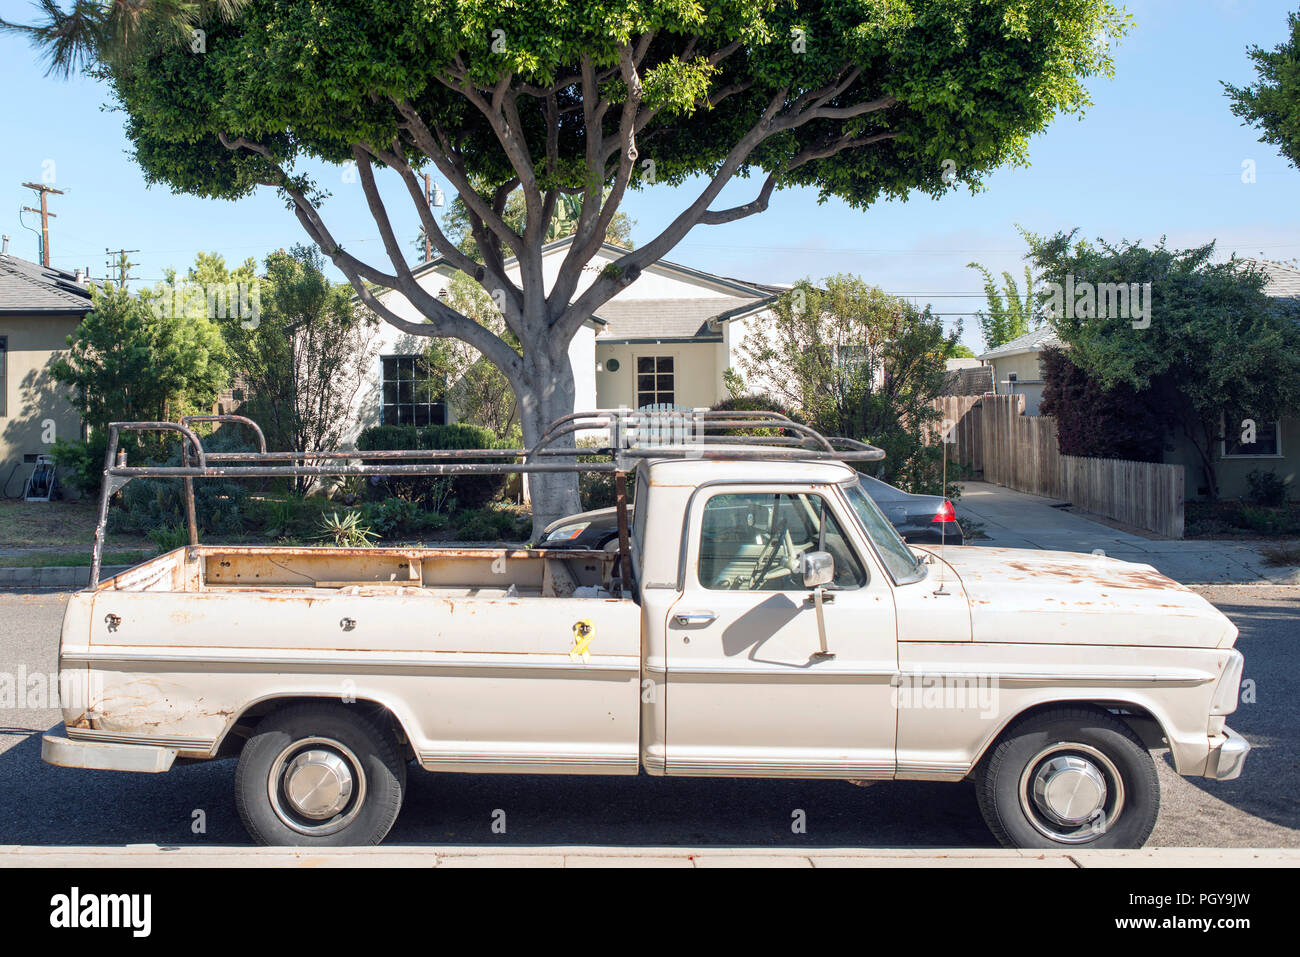 A view of a vintage pickup truck in Los Angeles, California Stock Photo